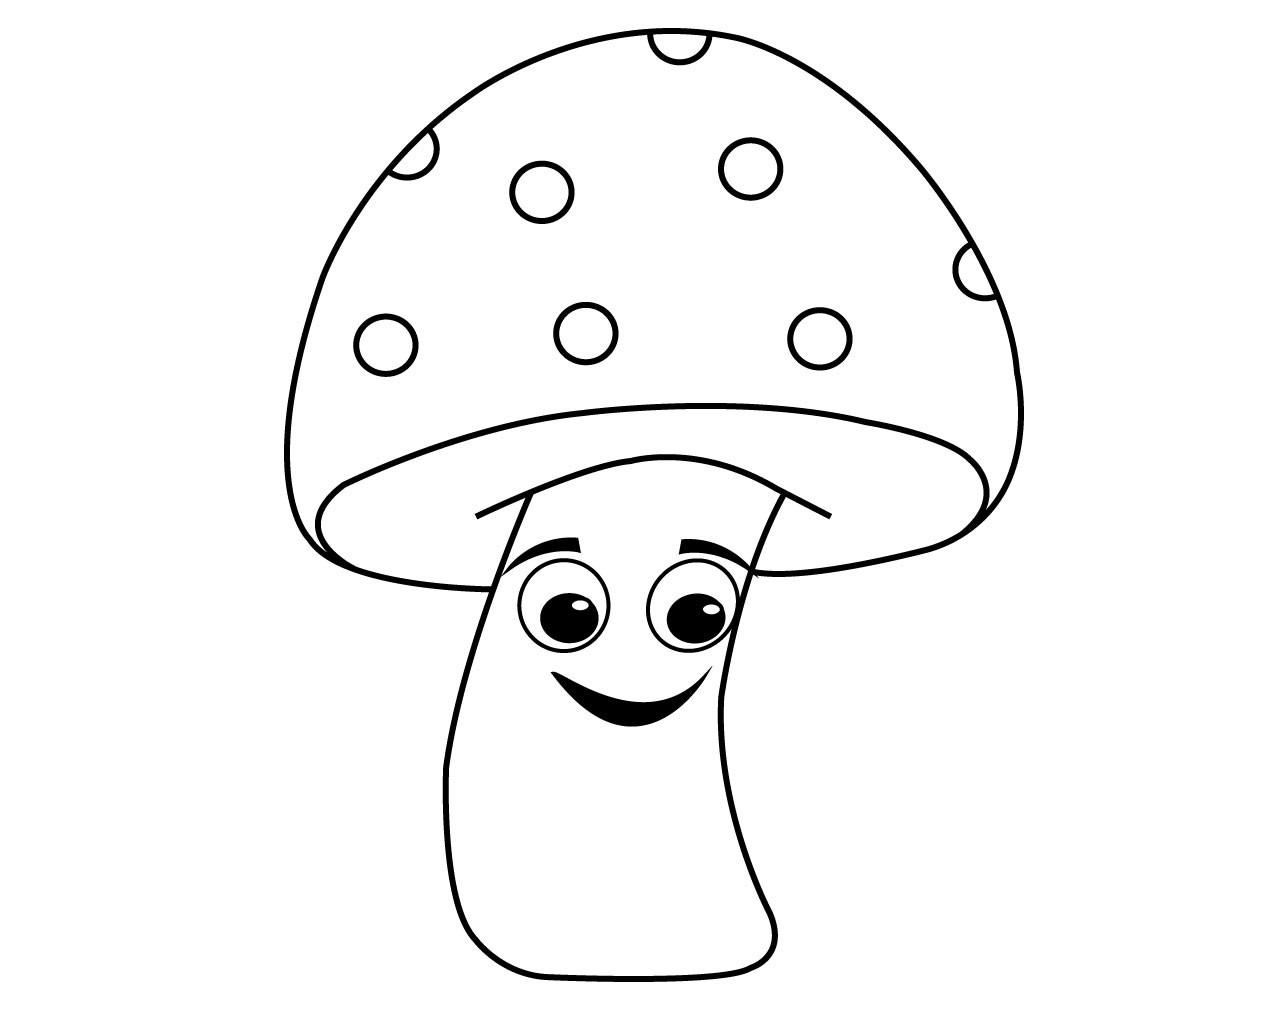 Coloring Pages For Toddler
 Printable Mushroom Coloring Pages For Toddlers